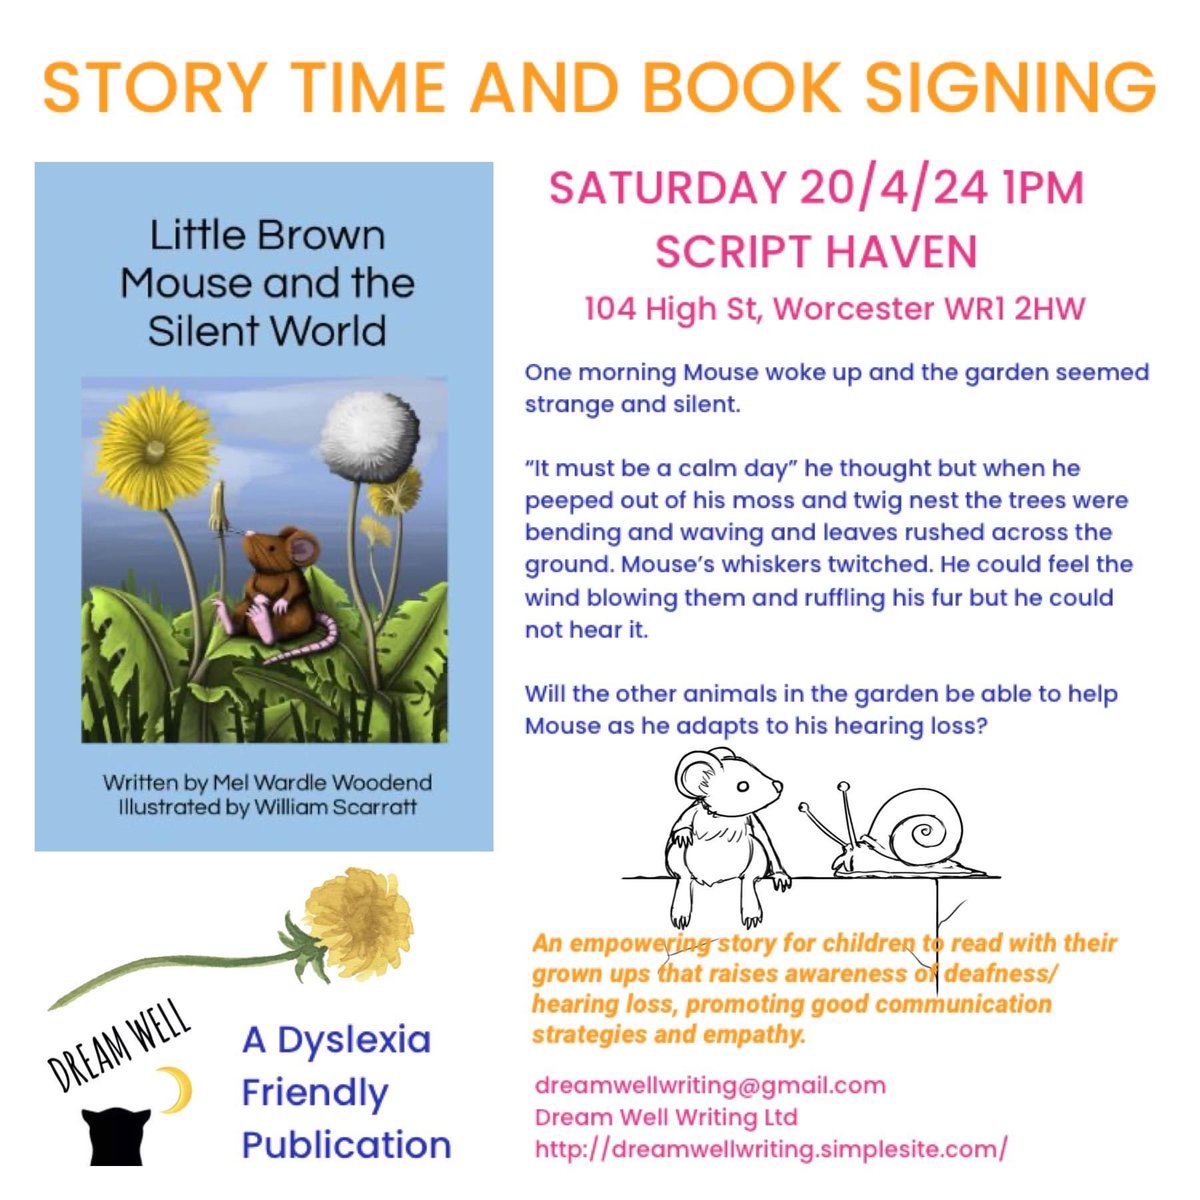 I’m so excited to be sharing a talk and readings from my new children’s book Little Brown Mouse and the Silent World at ⁦@scripthavenltd⁩ Worcester on Saturday 20th April!
#dyslexiafriendly #childrensstory #deafawareness #hearingloss #teachingaid #childrensliterature